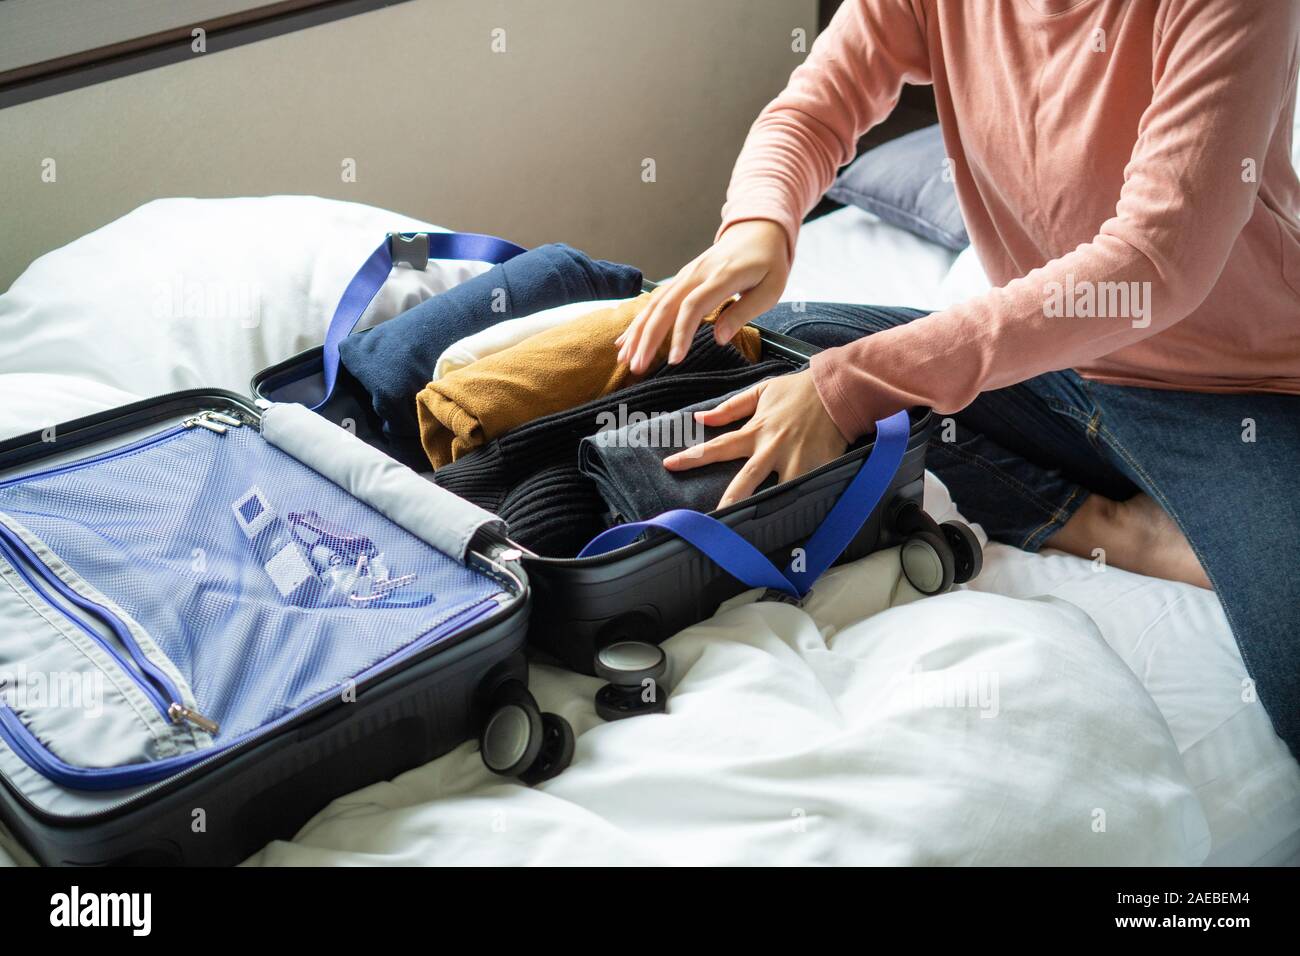 https://c8.alamy.com/comp/2AEBEM4/happy-young-woman-hands-packing-clothes-into-travel-luggage-on-bed-at-home-or-hotel-room-for-a-new-journey-tourism-and-vacation-concept-2AEBEM4.jpg